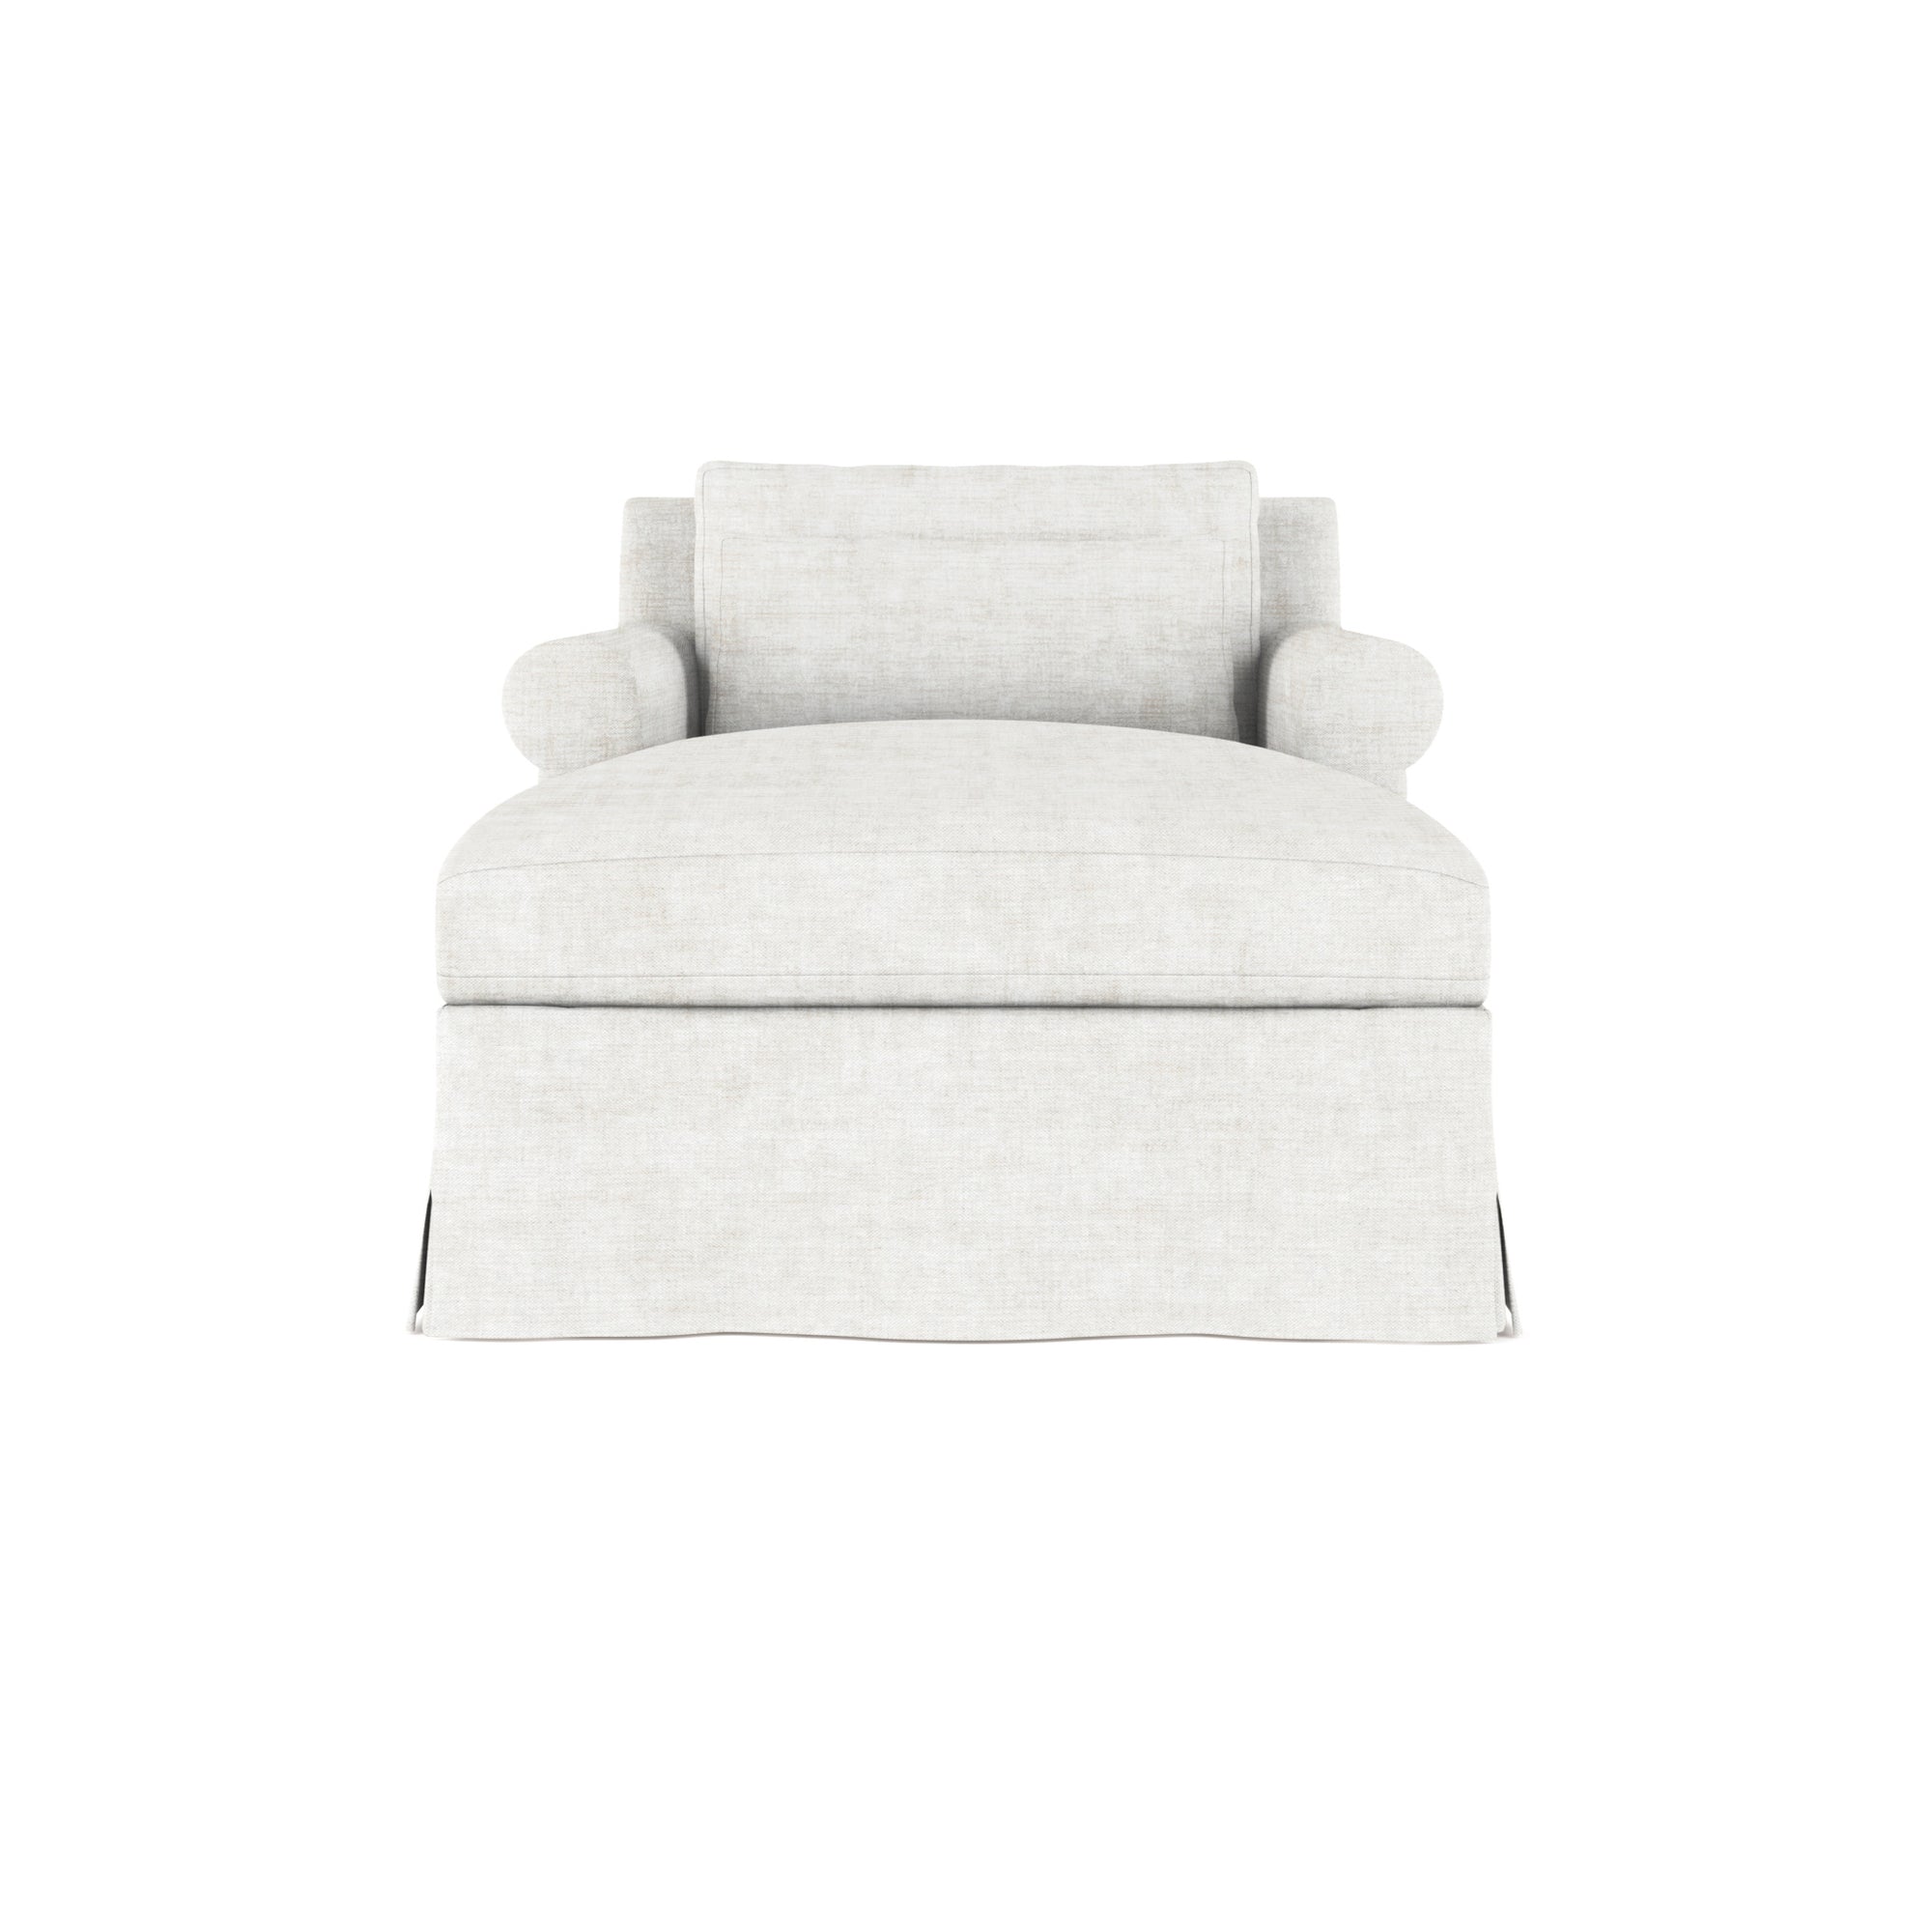 Ludlow Chaise - Alabaster Crushed Velvet